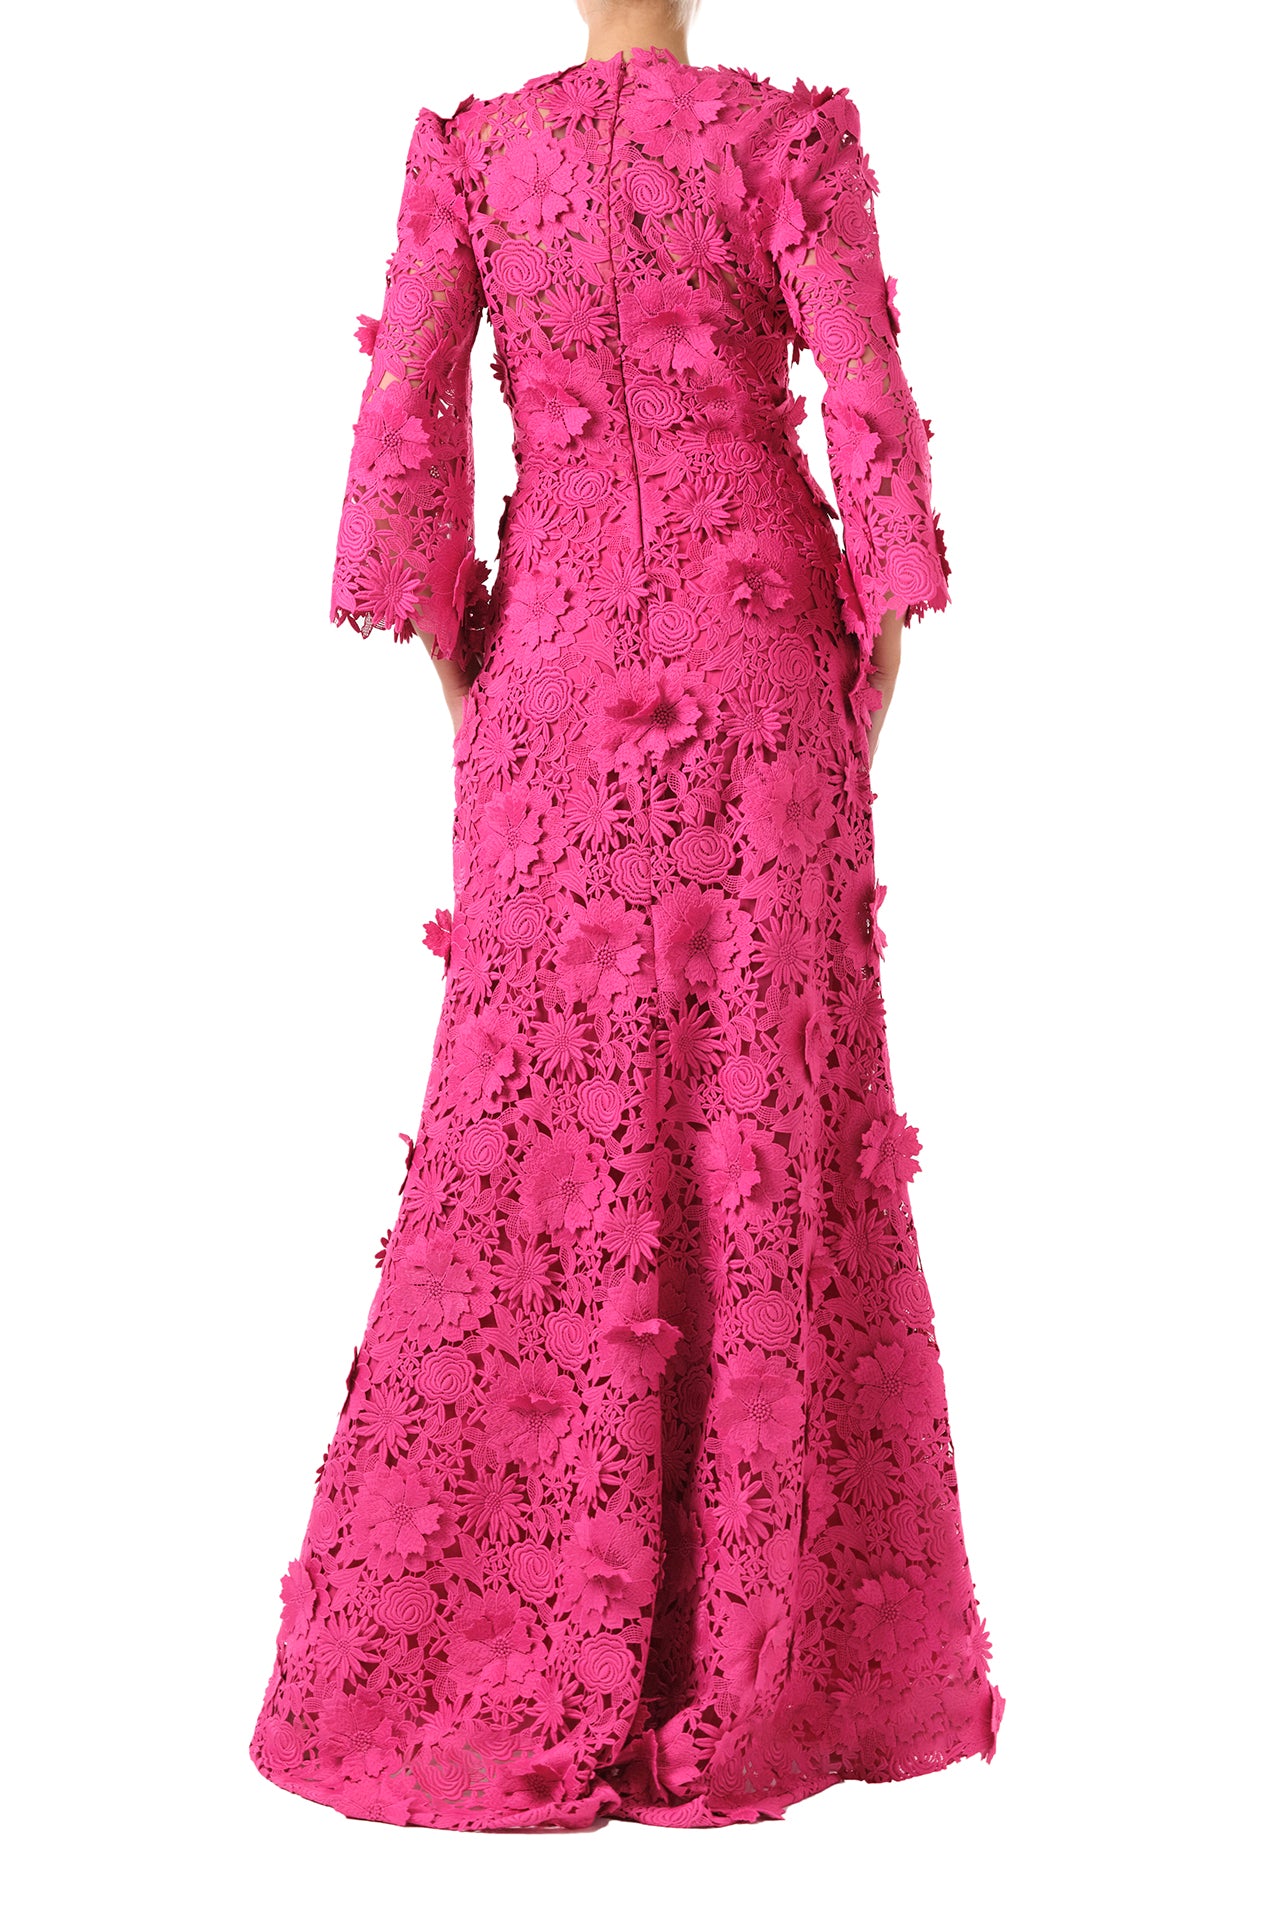 Monique Lhuillier Fall 2024 bell sleeve, floor length gown with deep v-neckline in Fuchsia 3D Guipure Lace - back.